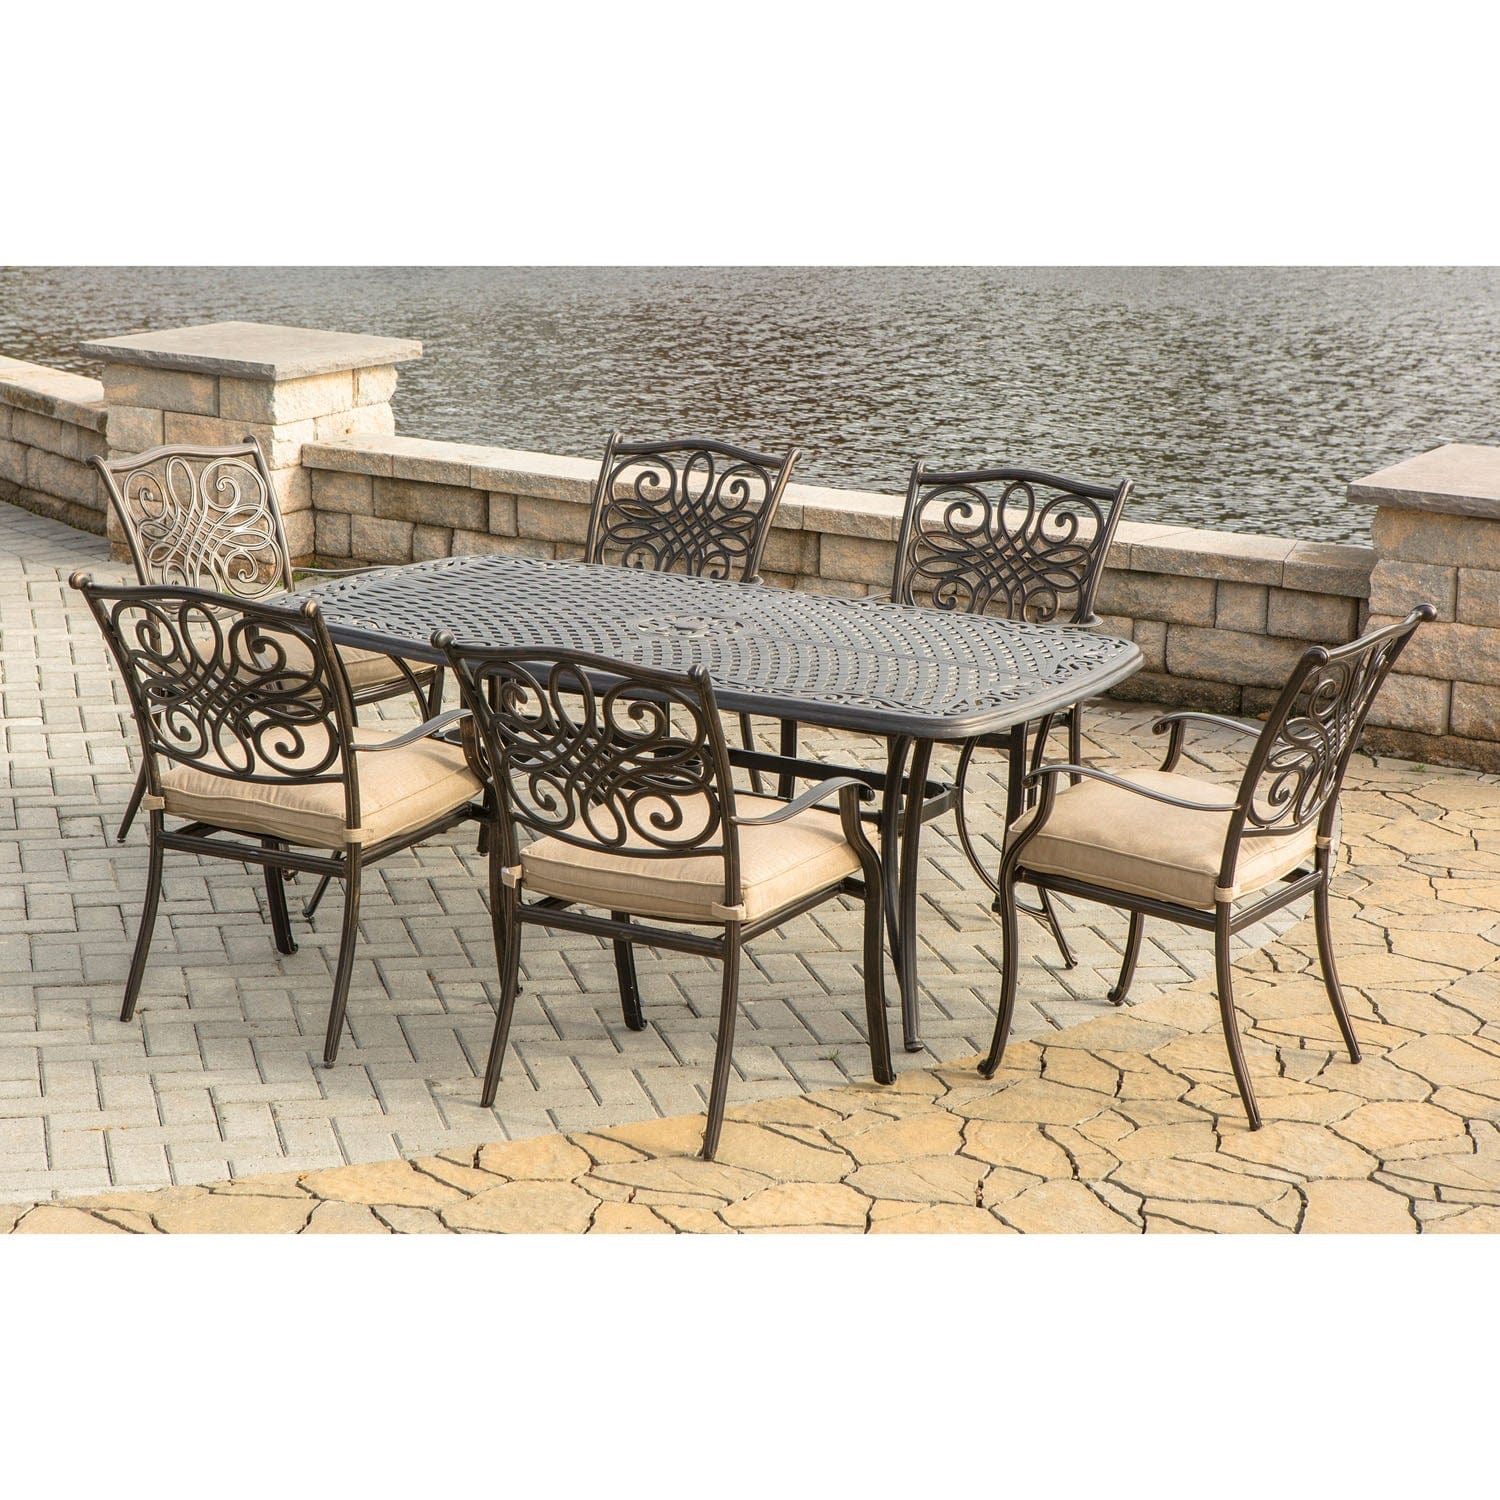 Hanover Outdoor Dining Set Hanover - Traditions 7-Piece Outdoor Dining Set | 72 x 38" Cast Top Table | 6 Dining Chairs | Tan | TRADITIONS7PC